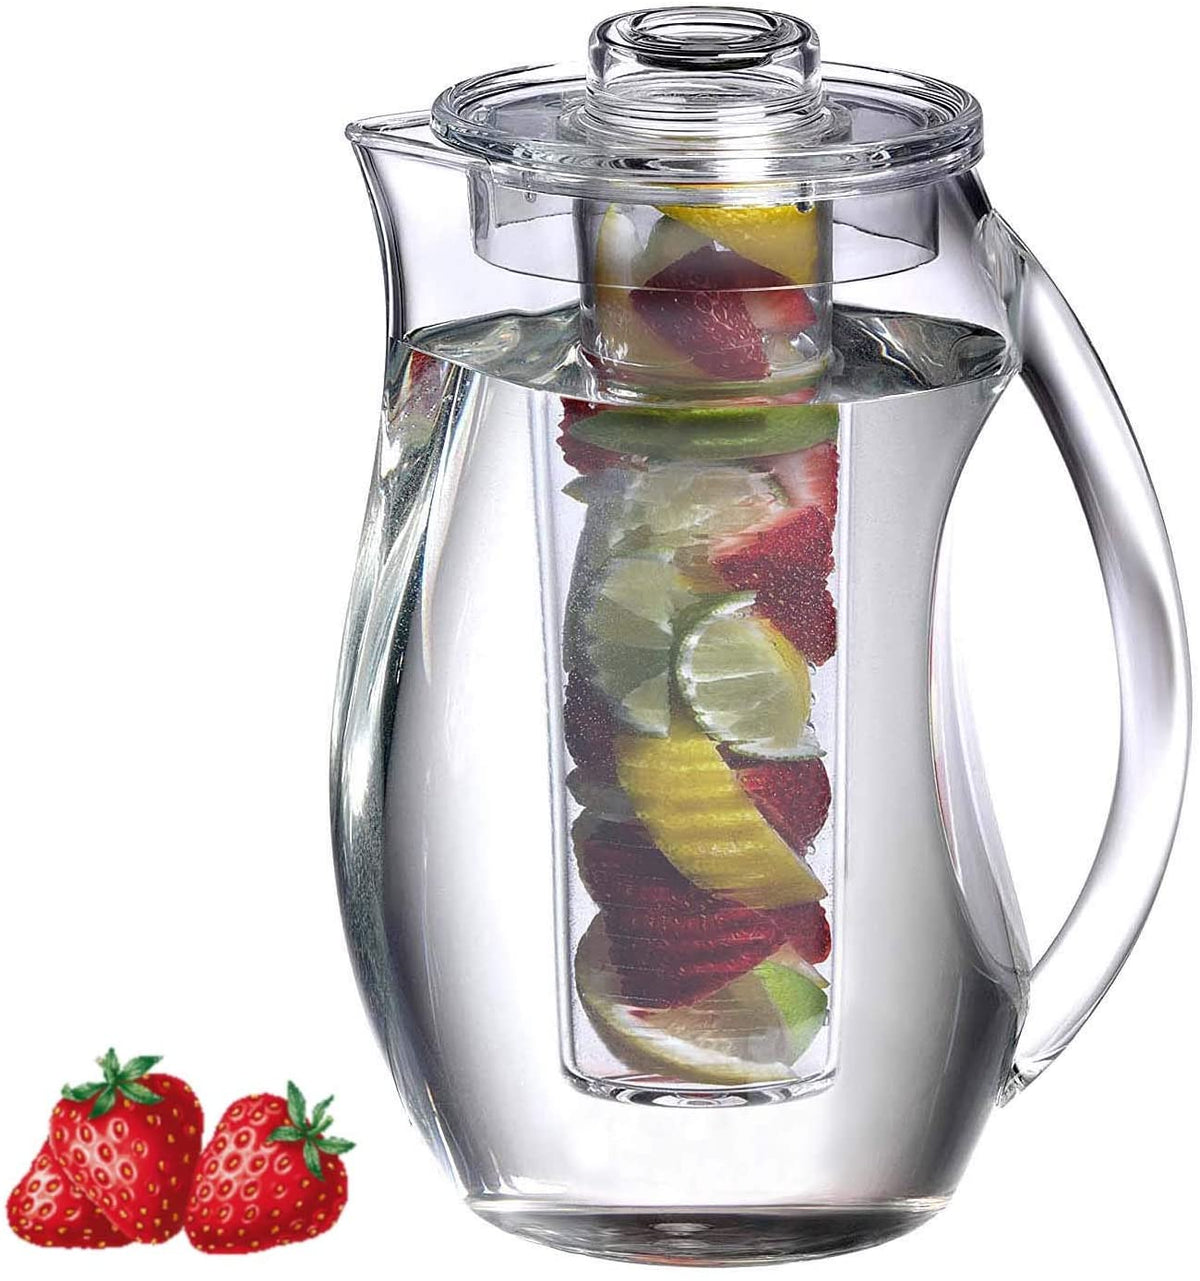 Fruit Infusion Pitcher (2.4L, Acrylic, Clear)